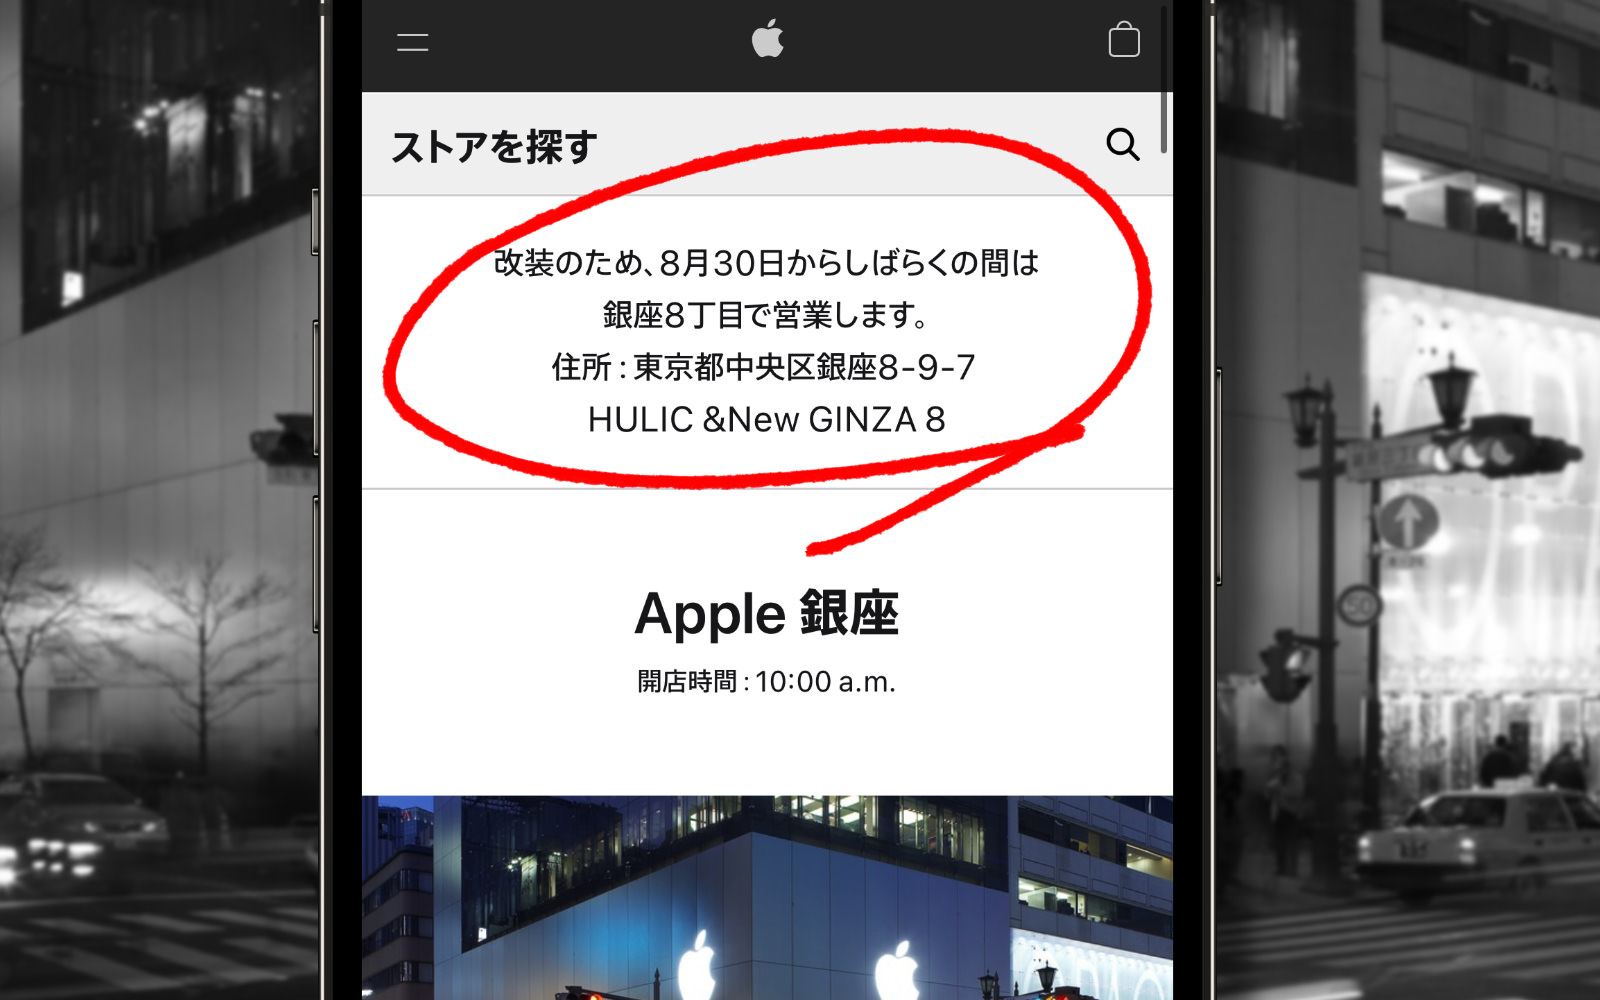 Apple Ginza Temporary Store